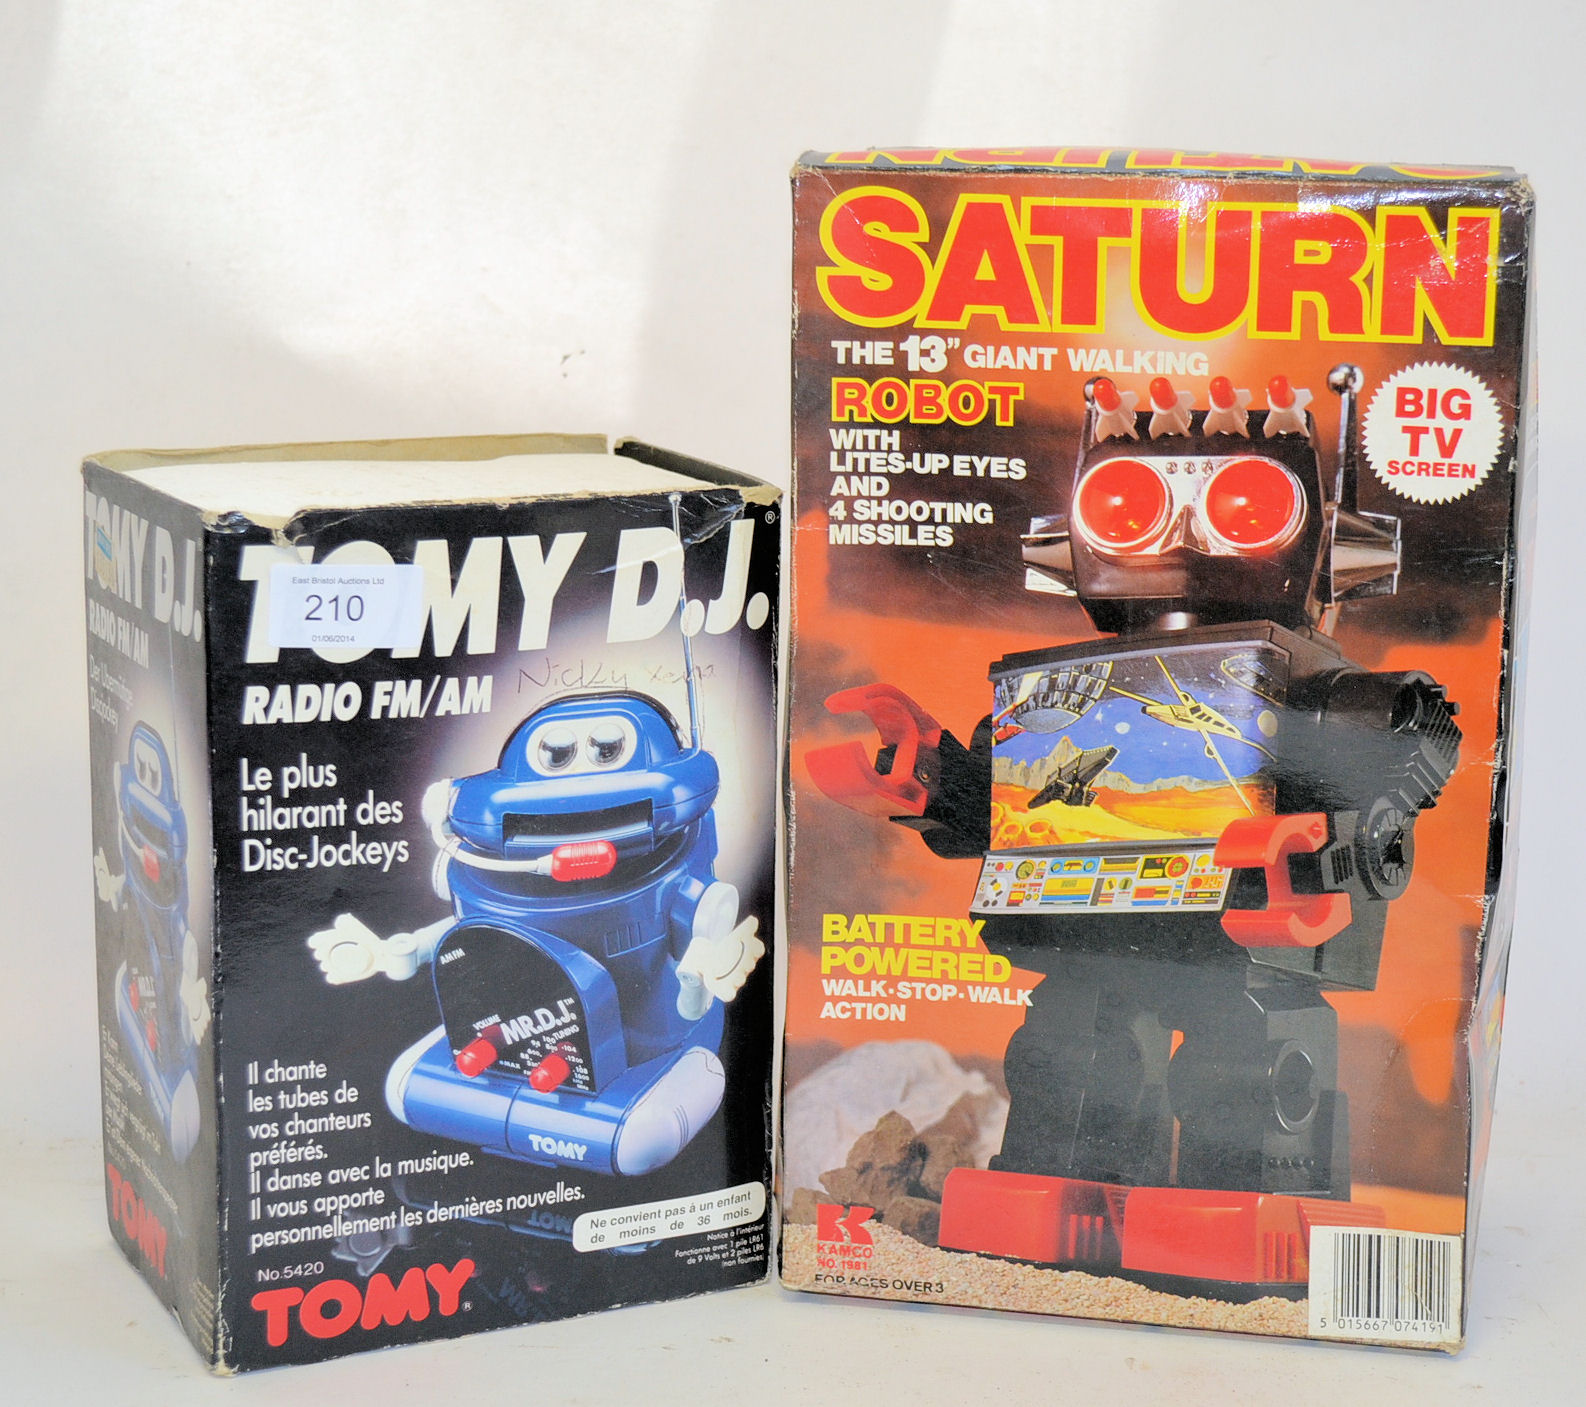 A vintage boxed Saturn 13" Walking battery operated robot, along with a boxed Tomy DJ robot.